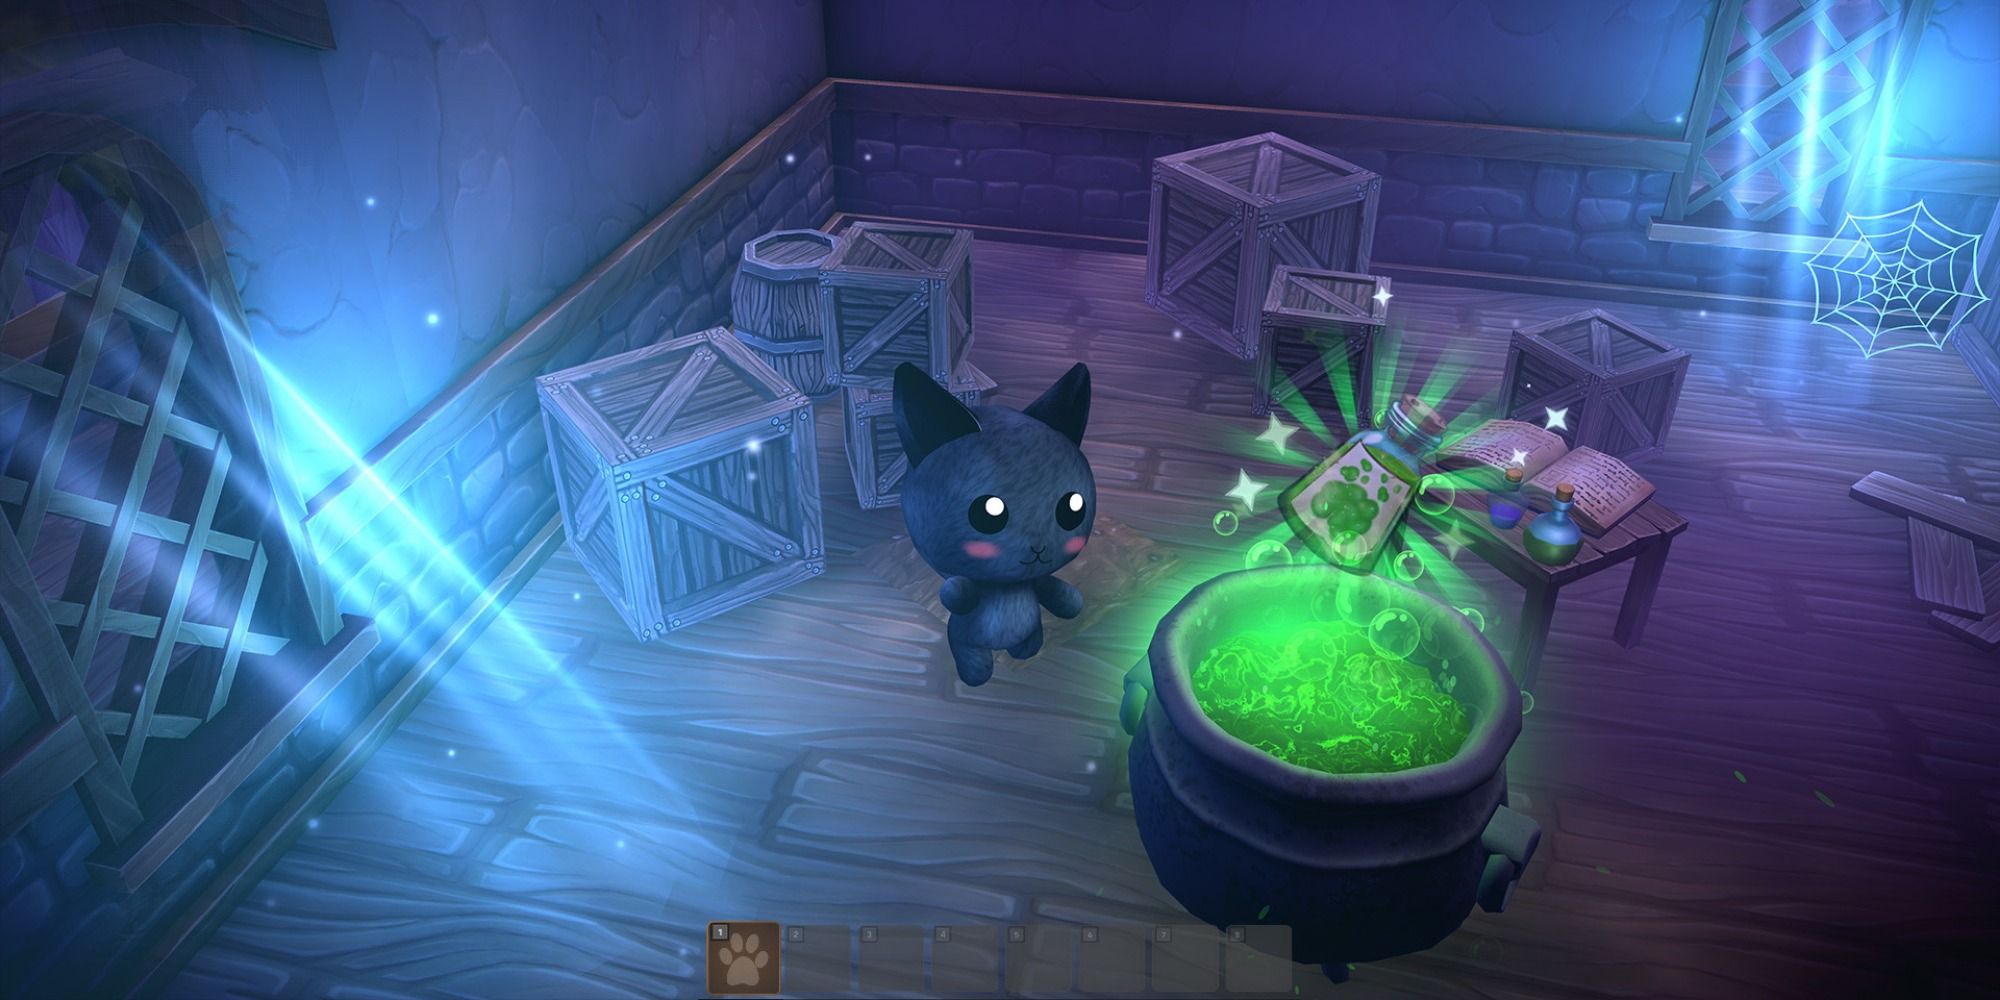 A black cat crafts a potion at a green bubbling cauldron in a dark room